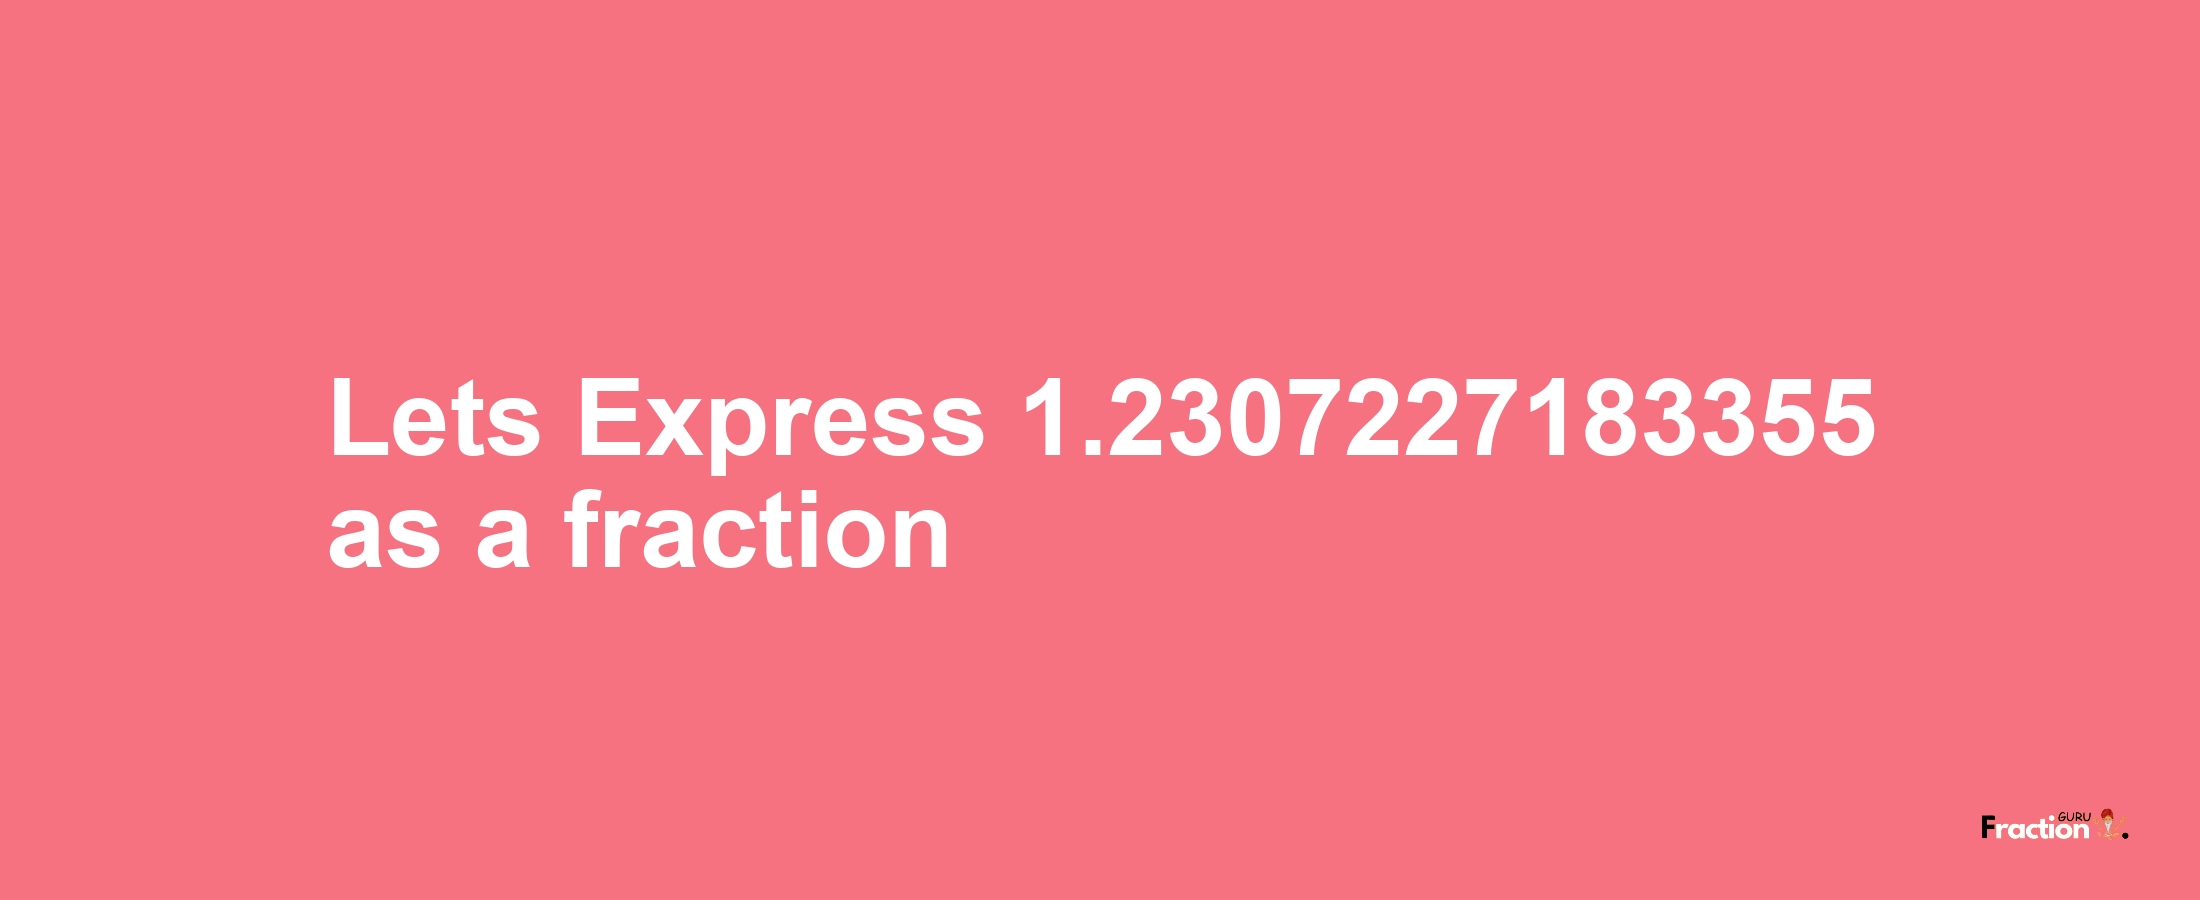 Lets Express 1.2307227183355 as afraction